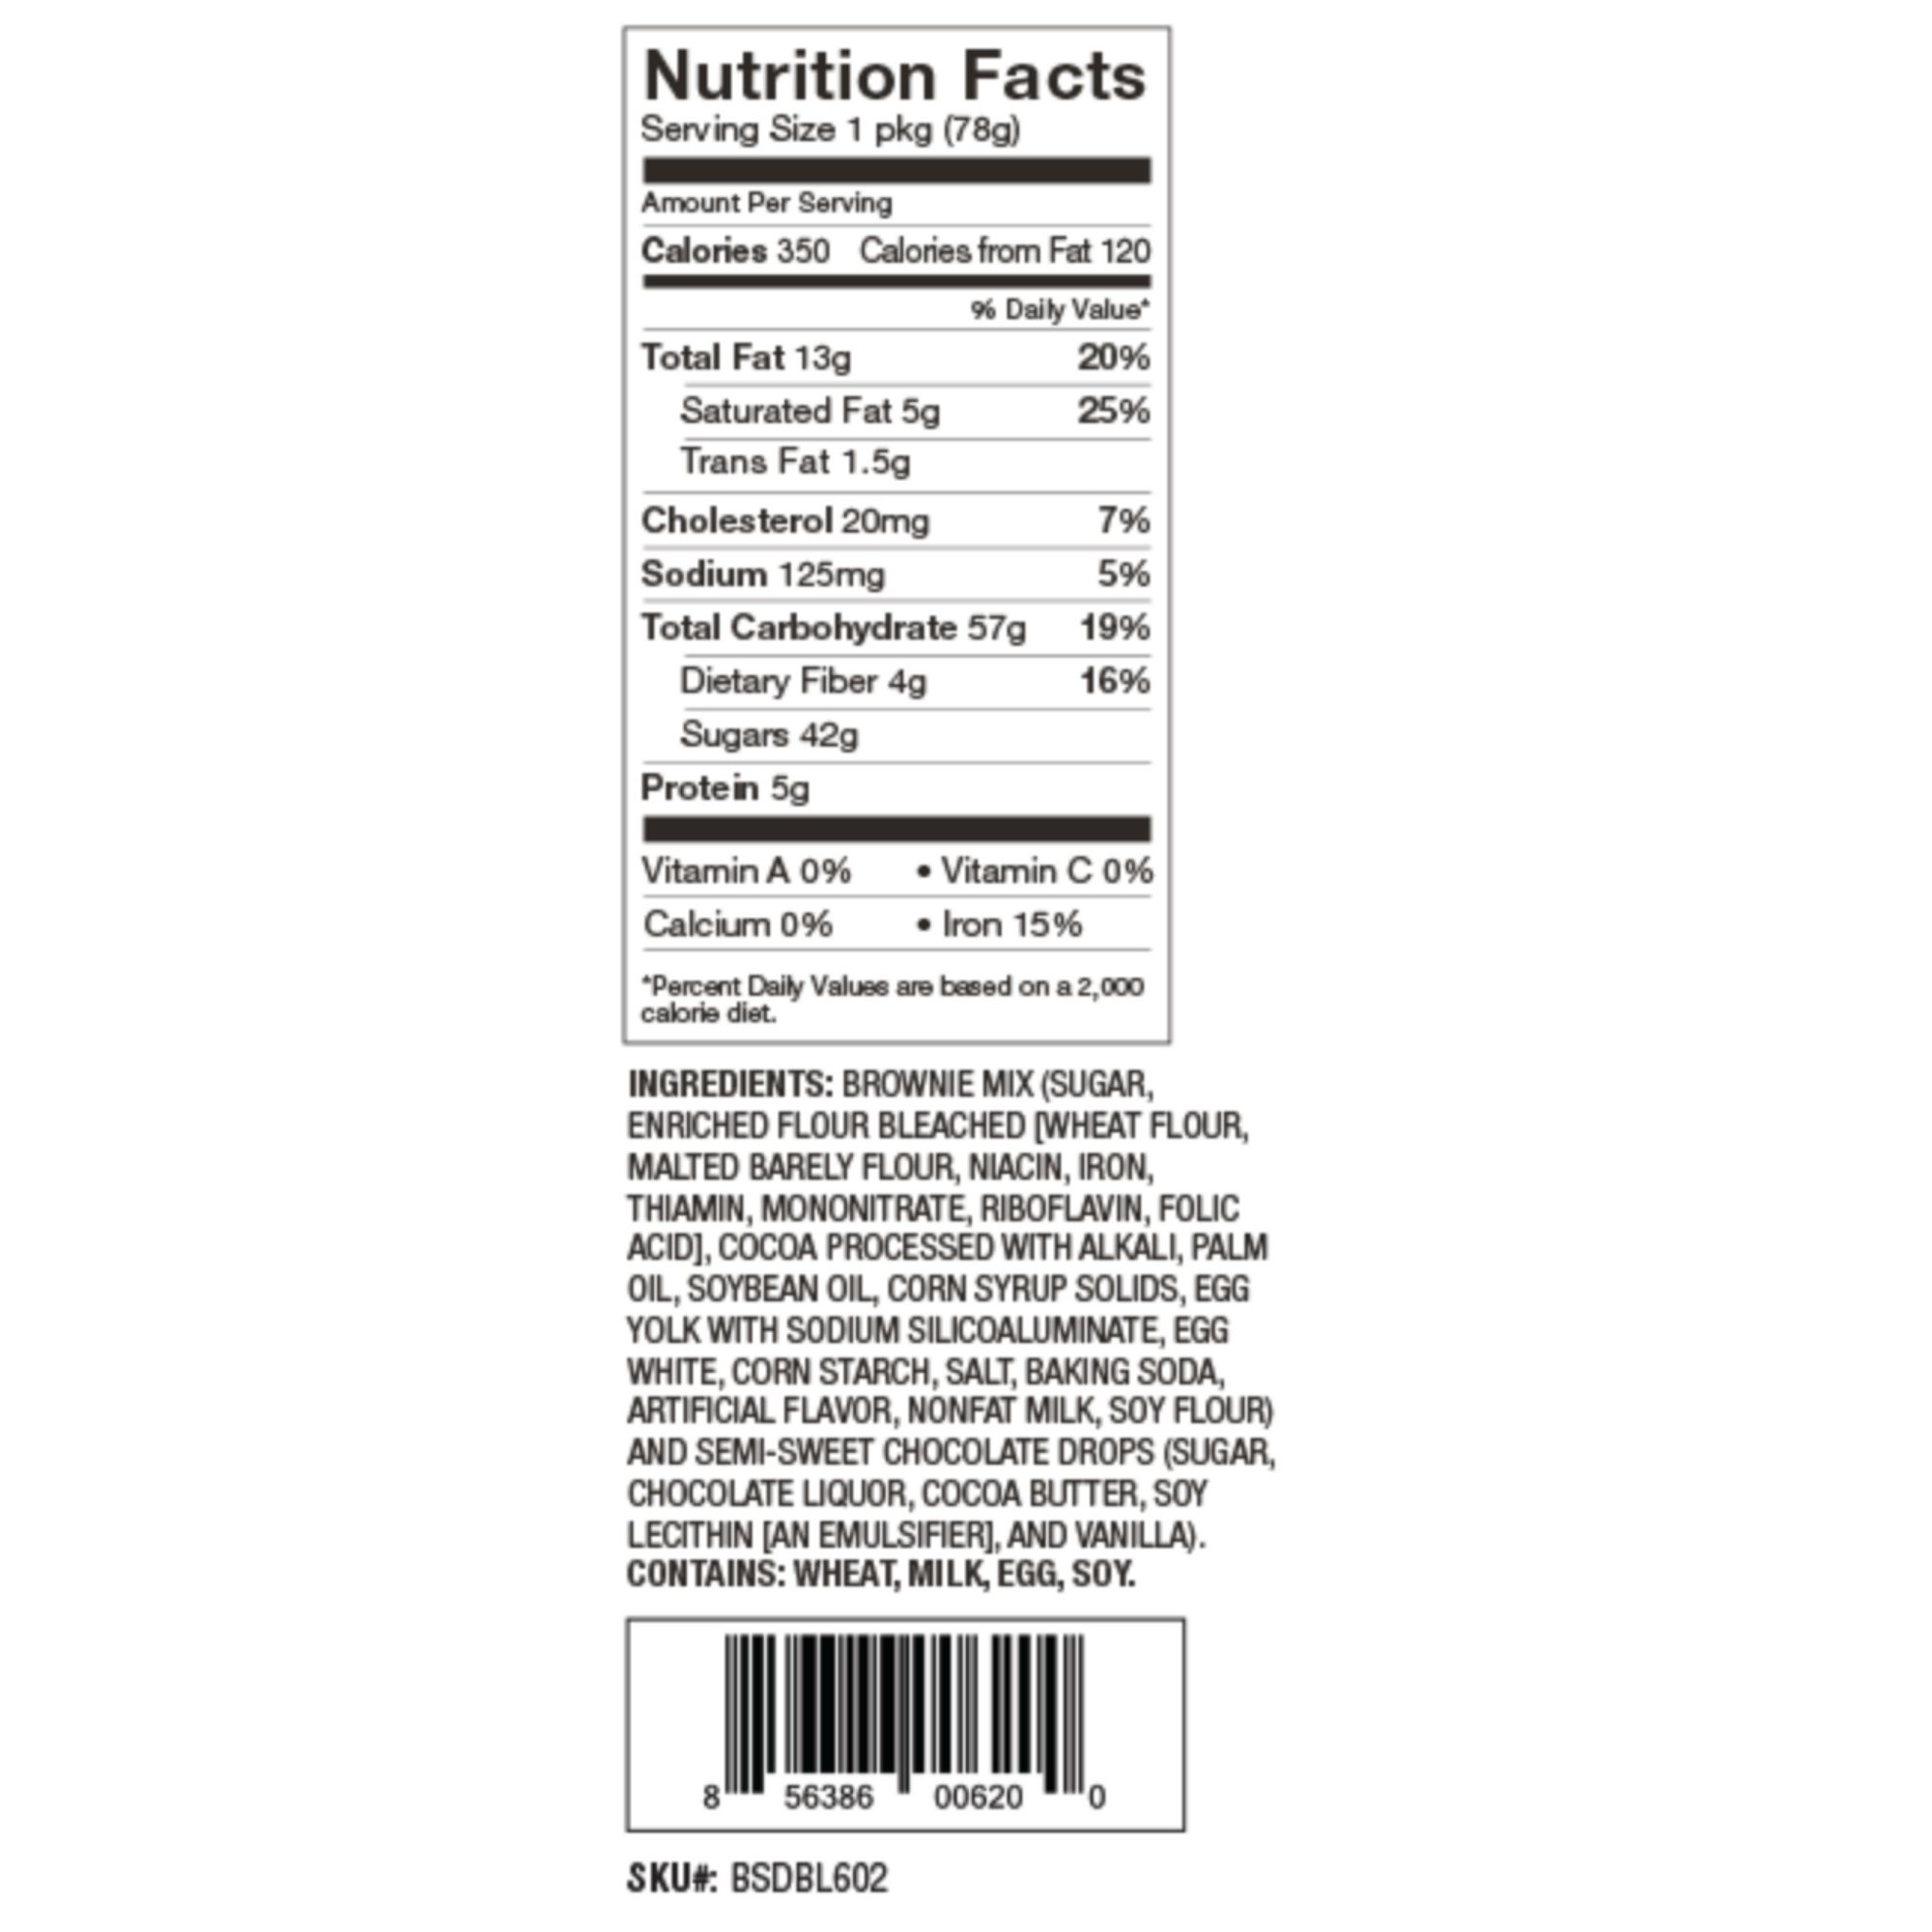 Nutrition Facts of Double Chocolate Chip